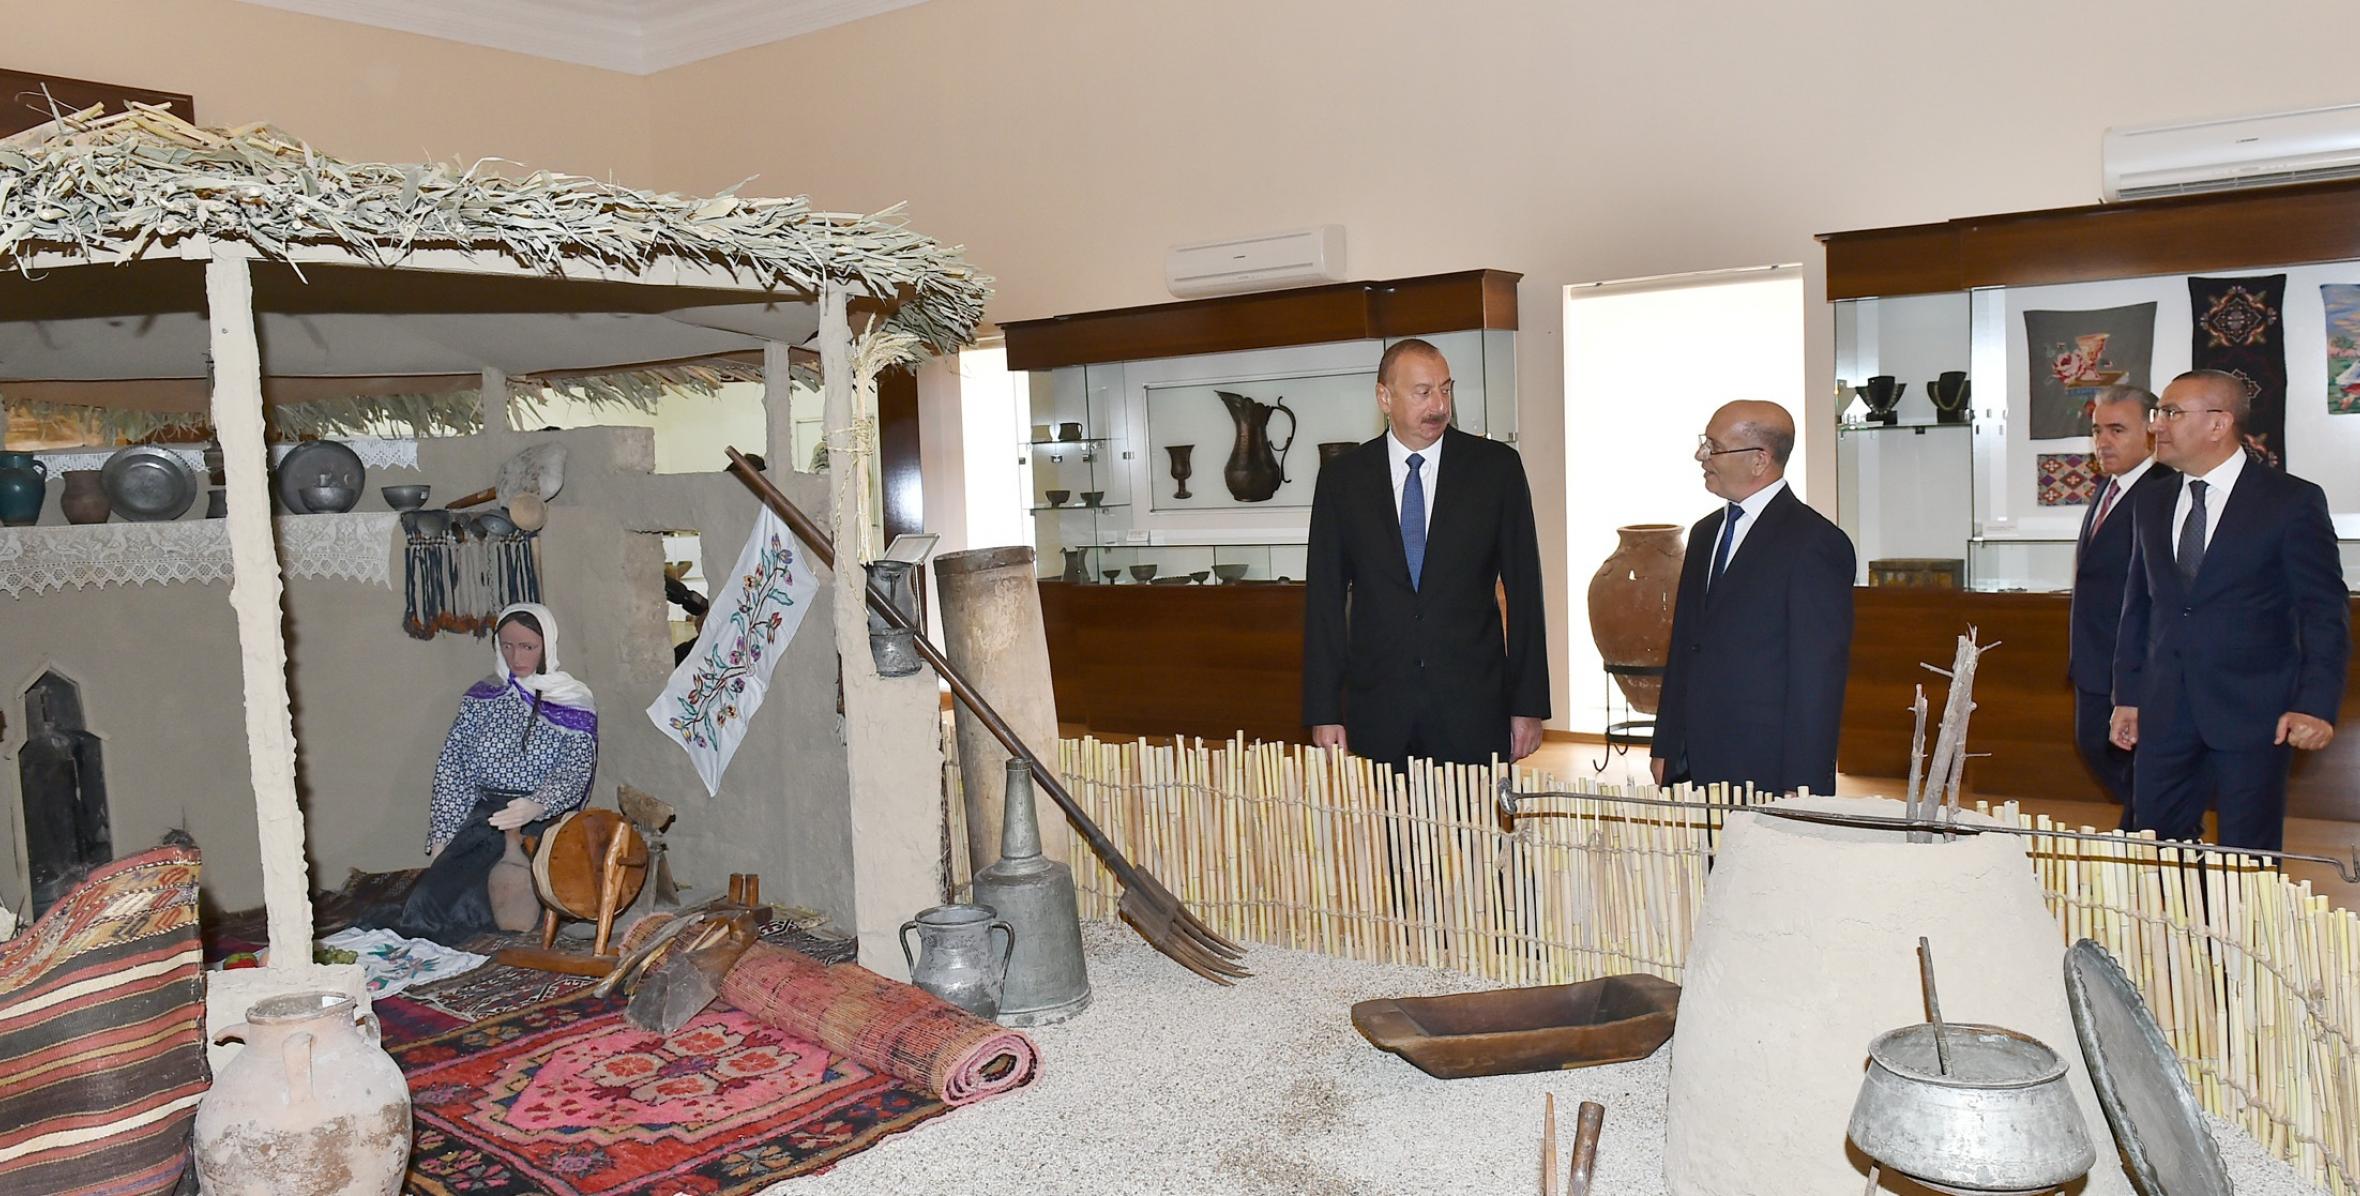 Ilham Aliyev viewed Museum of History and Local Lore in Shamkir after major overhaul